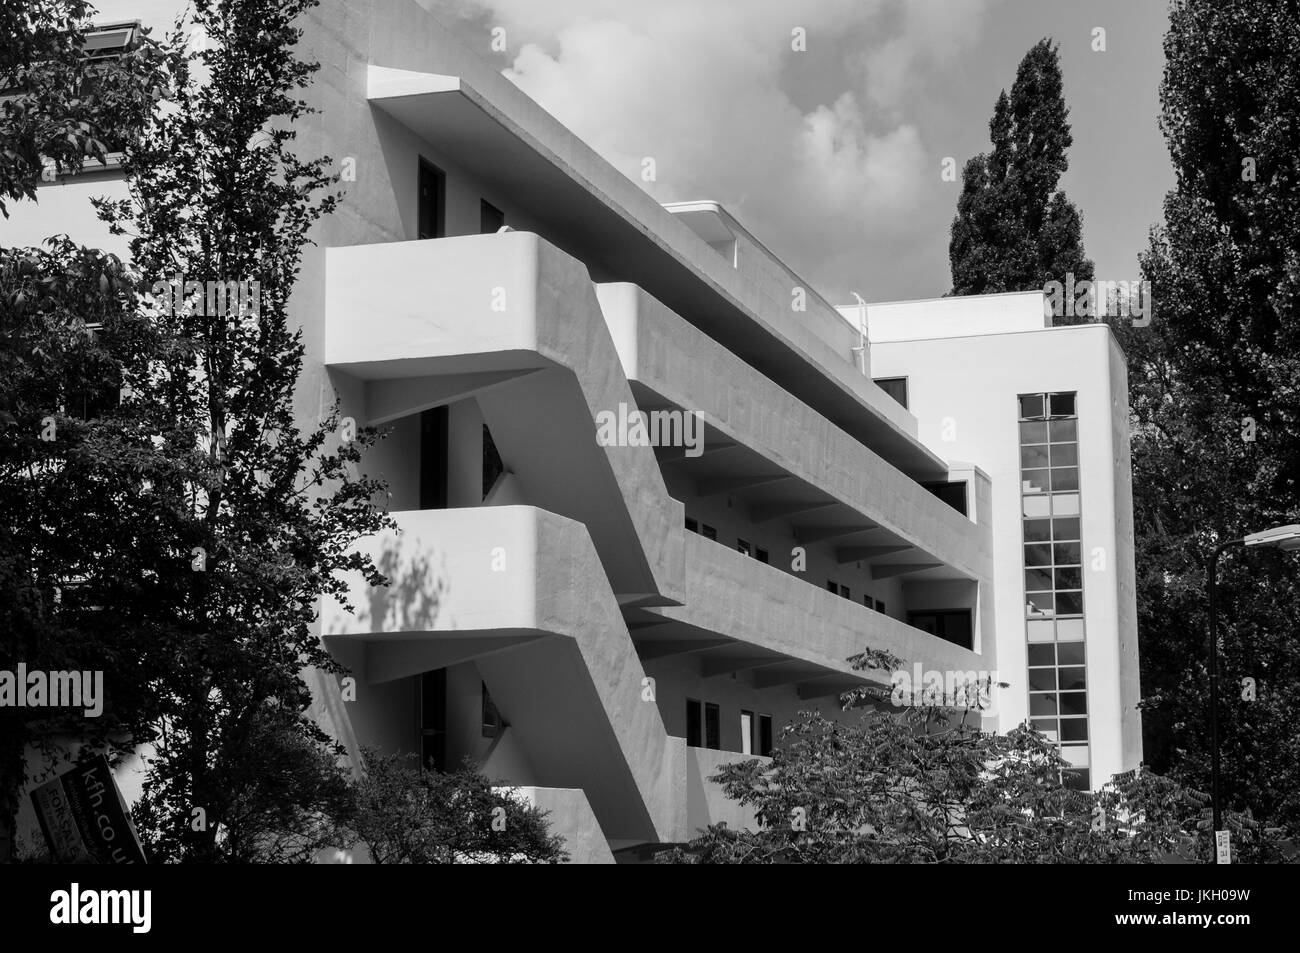 The Bauhaus influenced 1930s modernist Isokon apartment building, designed by Wells Coates, in Hampstead, London. Black and white. Stock Photo